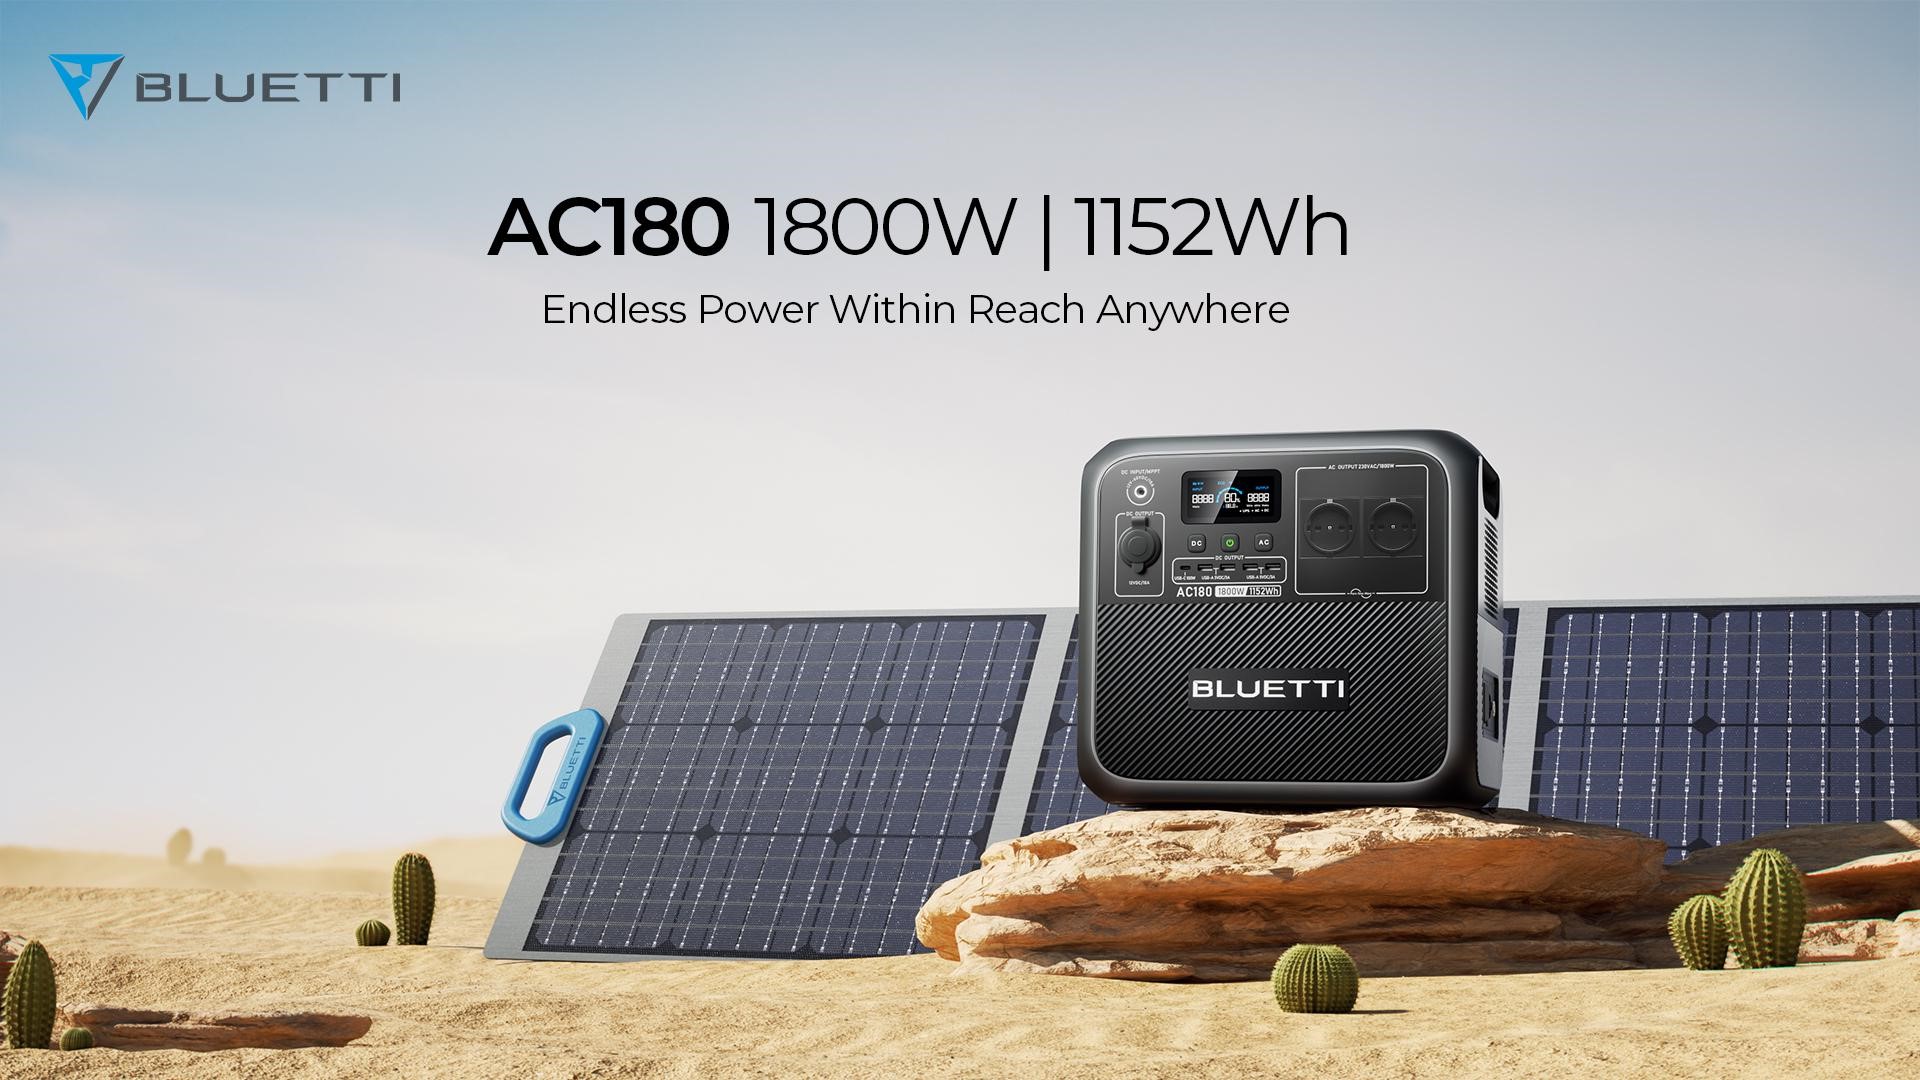 Bluetti's New Power Station Is Hot-Swappable, While Its Portable Cooler Is  Ice Cold - CNET